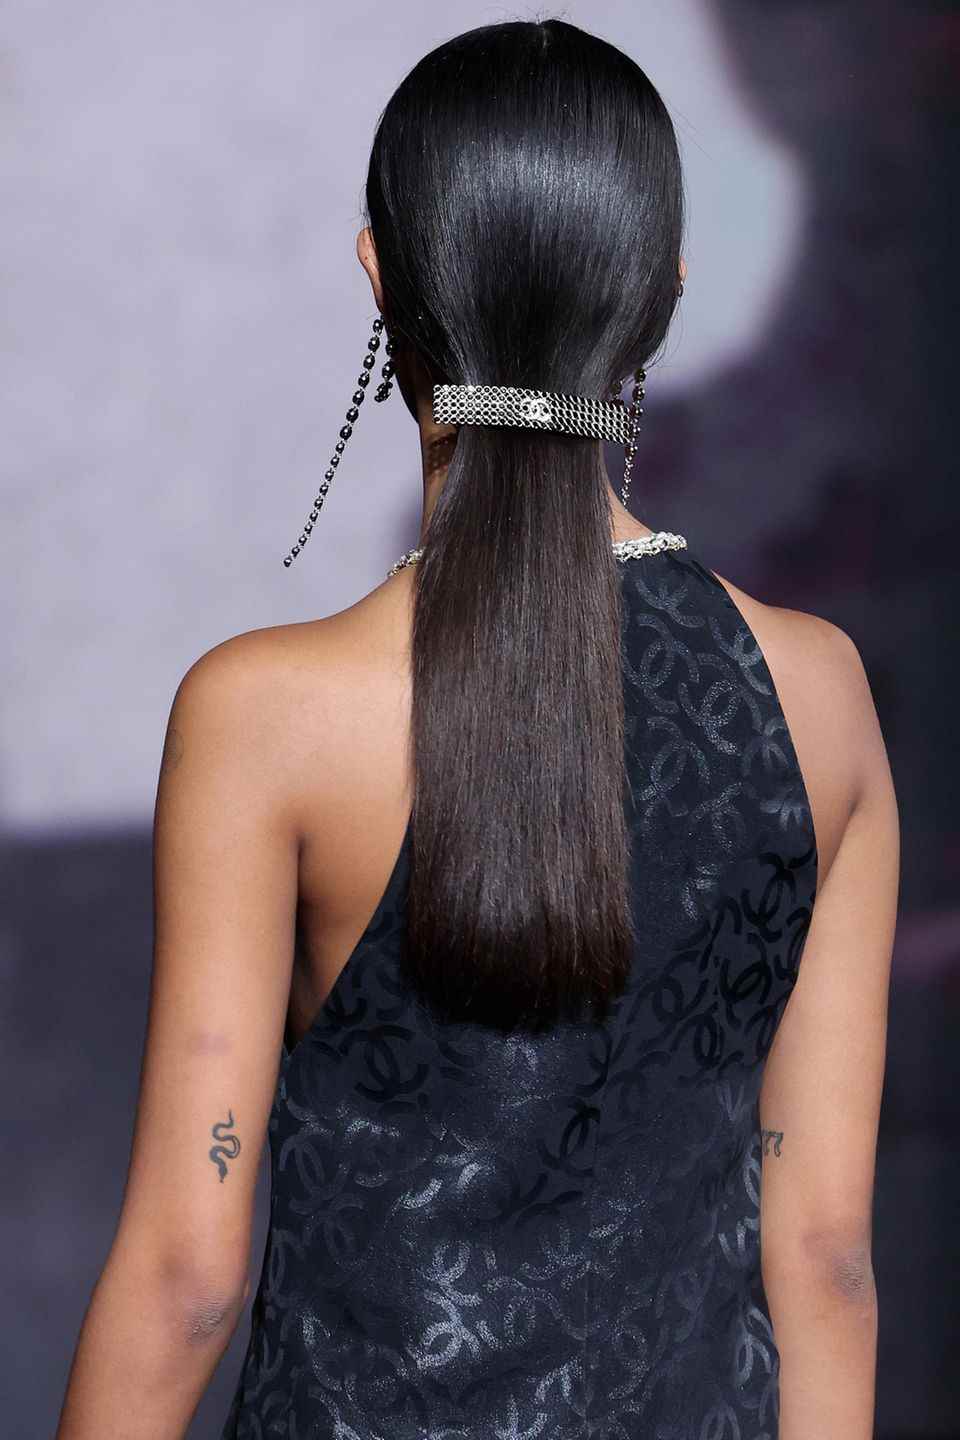 Hair clips are back in fashion thanks to Chanel